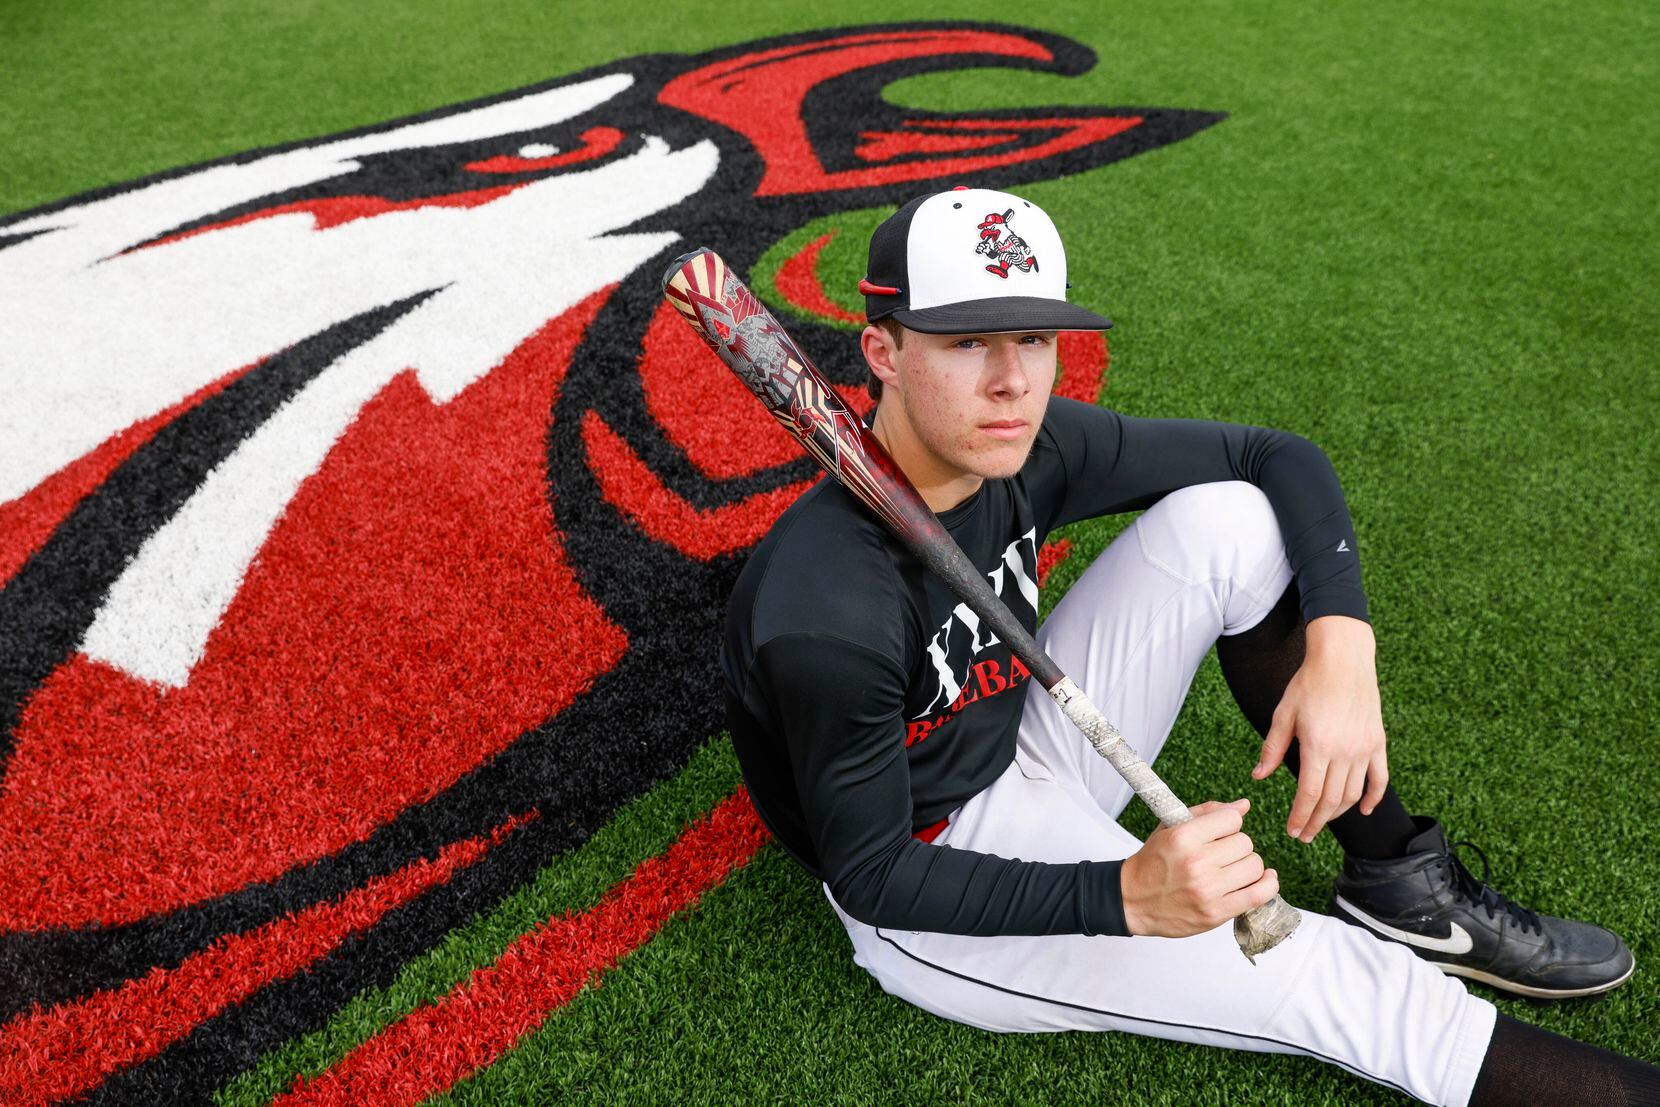 Colleyville shortstop Bobby Witt Jr. could become D-FW's greatest